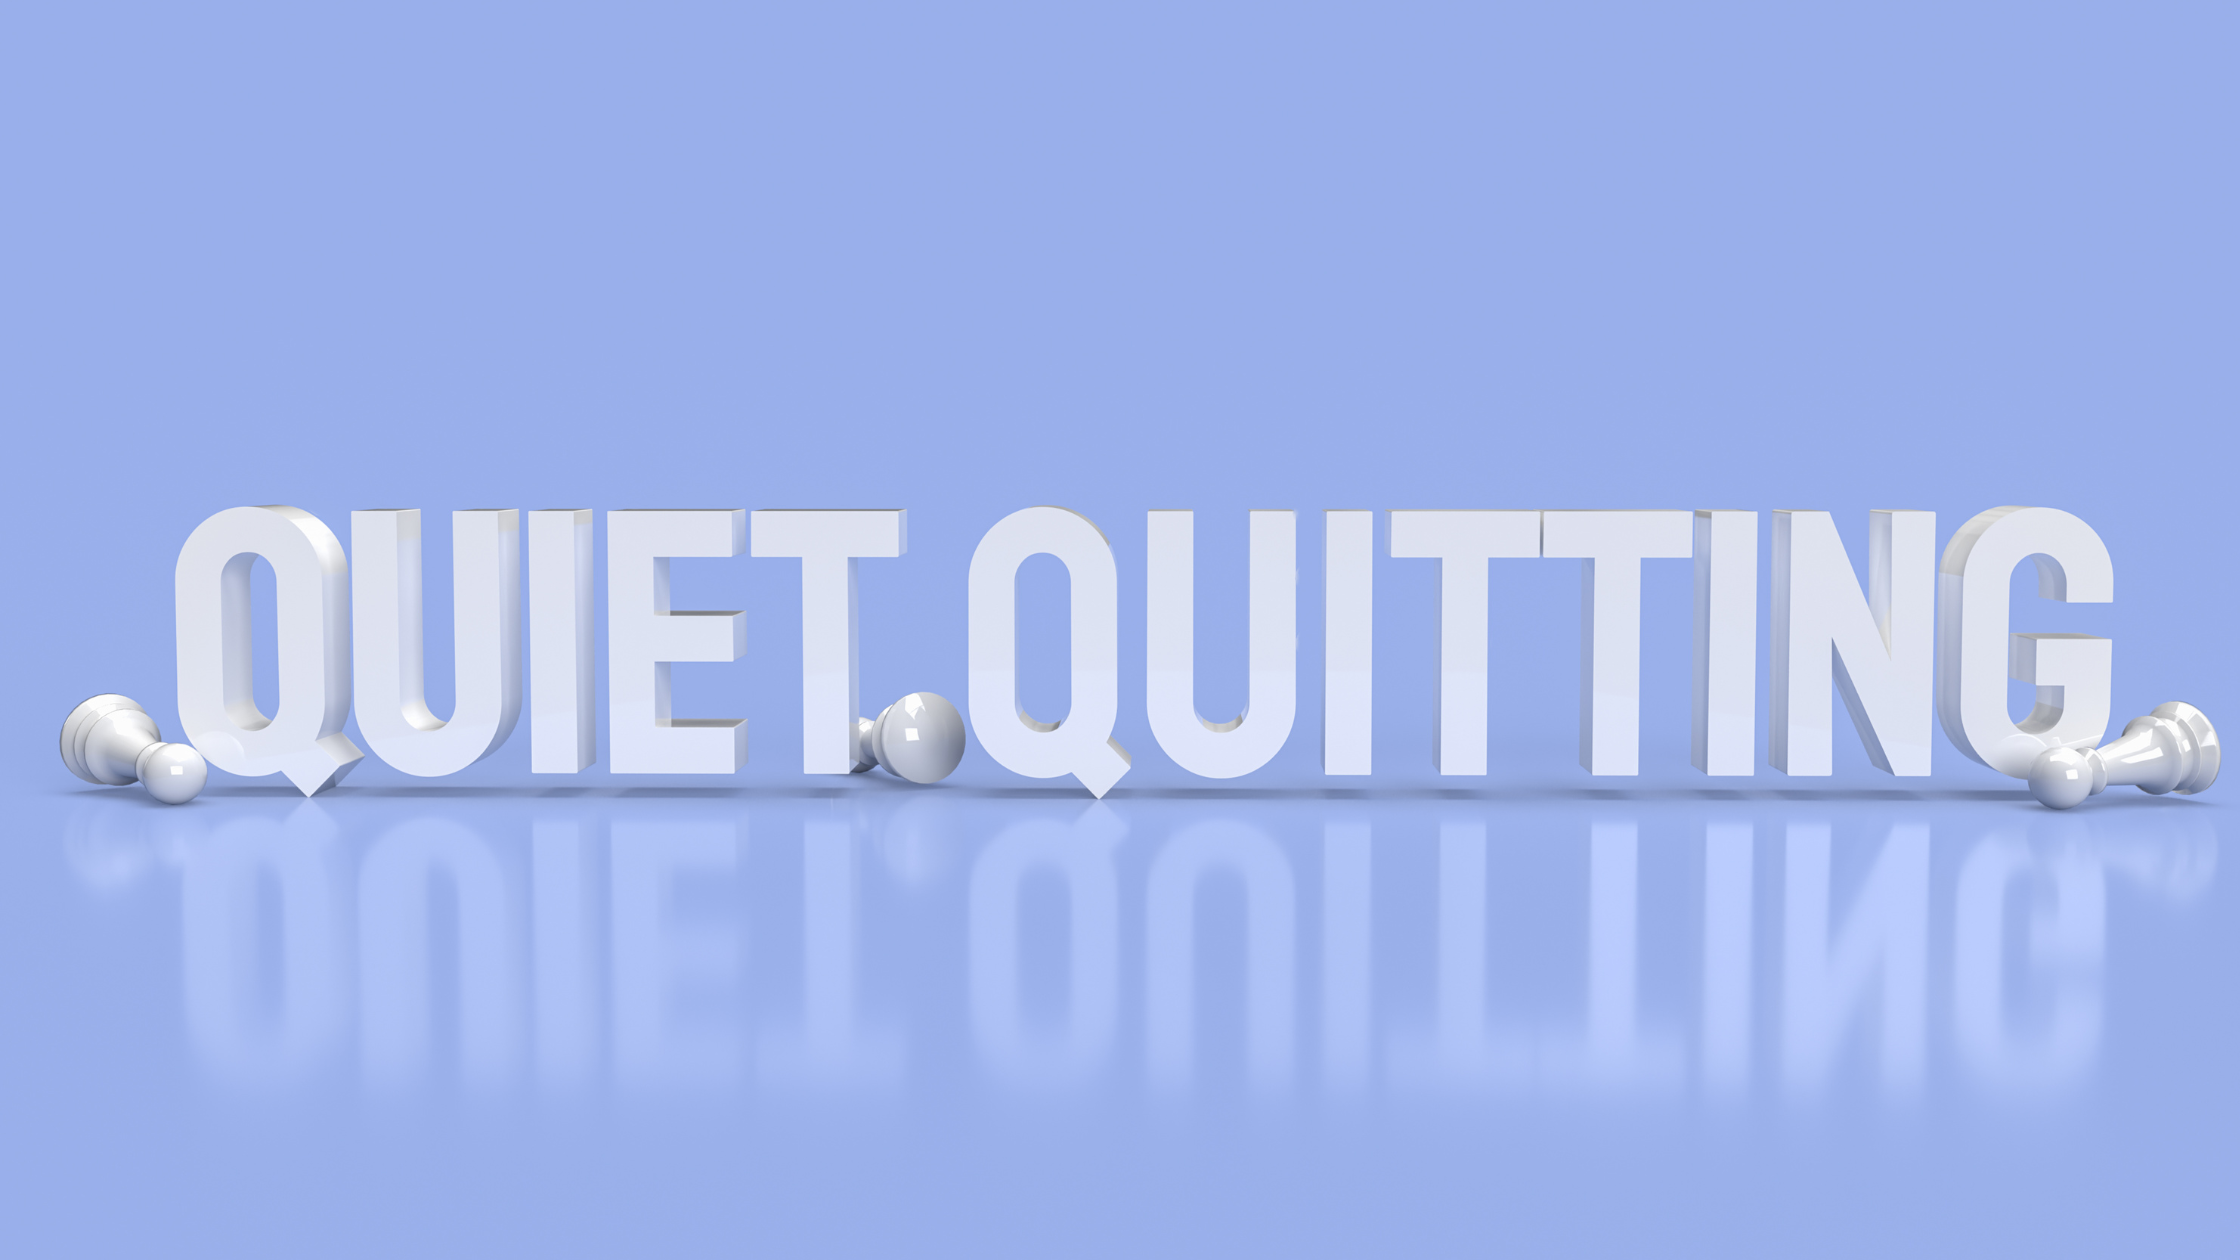 Quiet Quitting: What It Means, Why It's Blowing Up, and Our Take on It